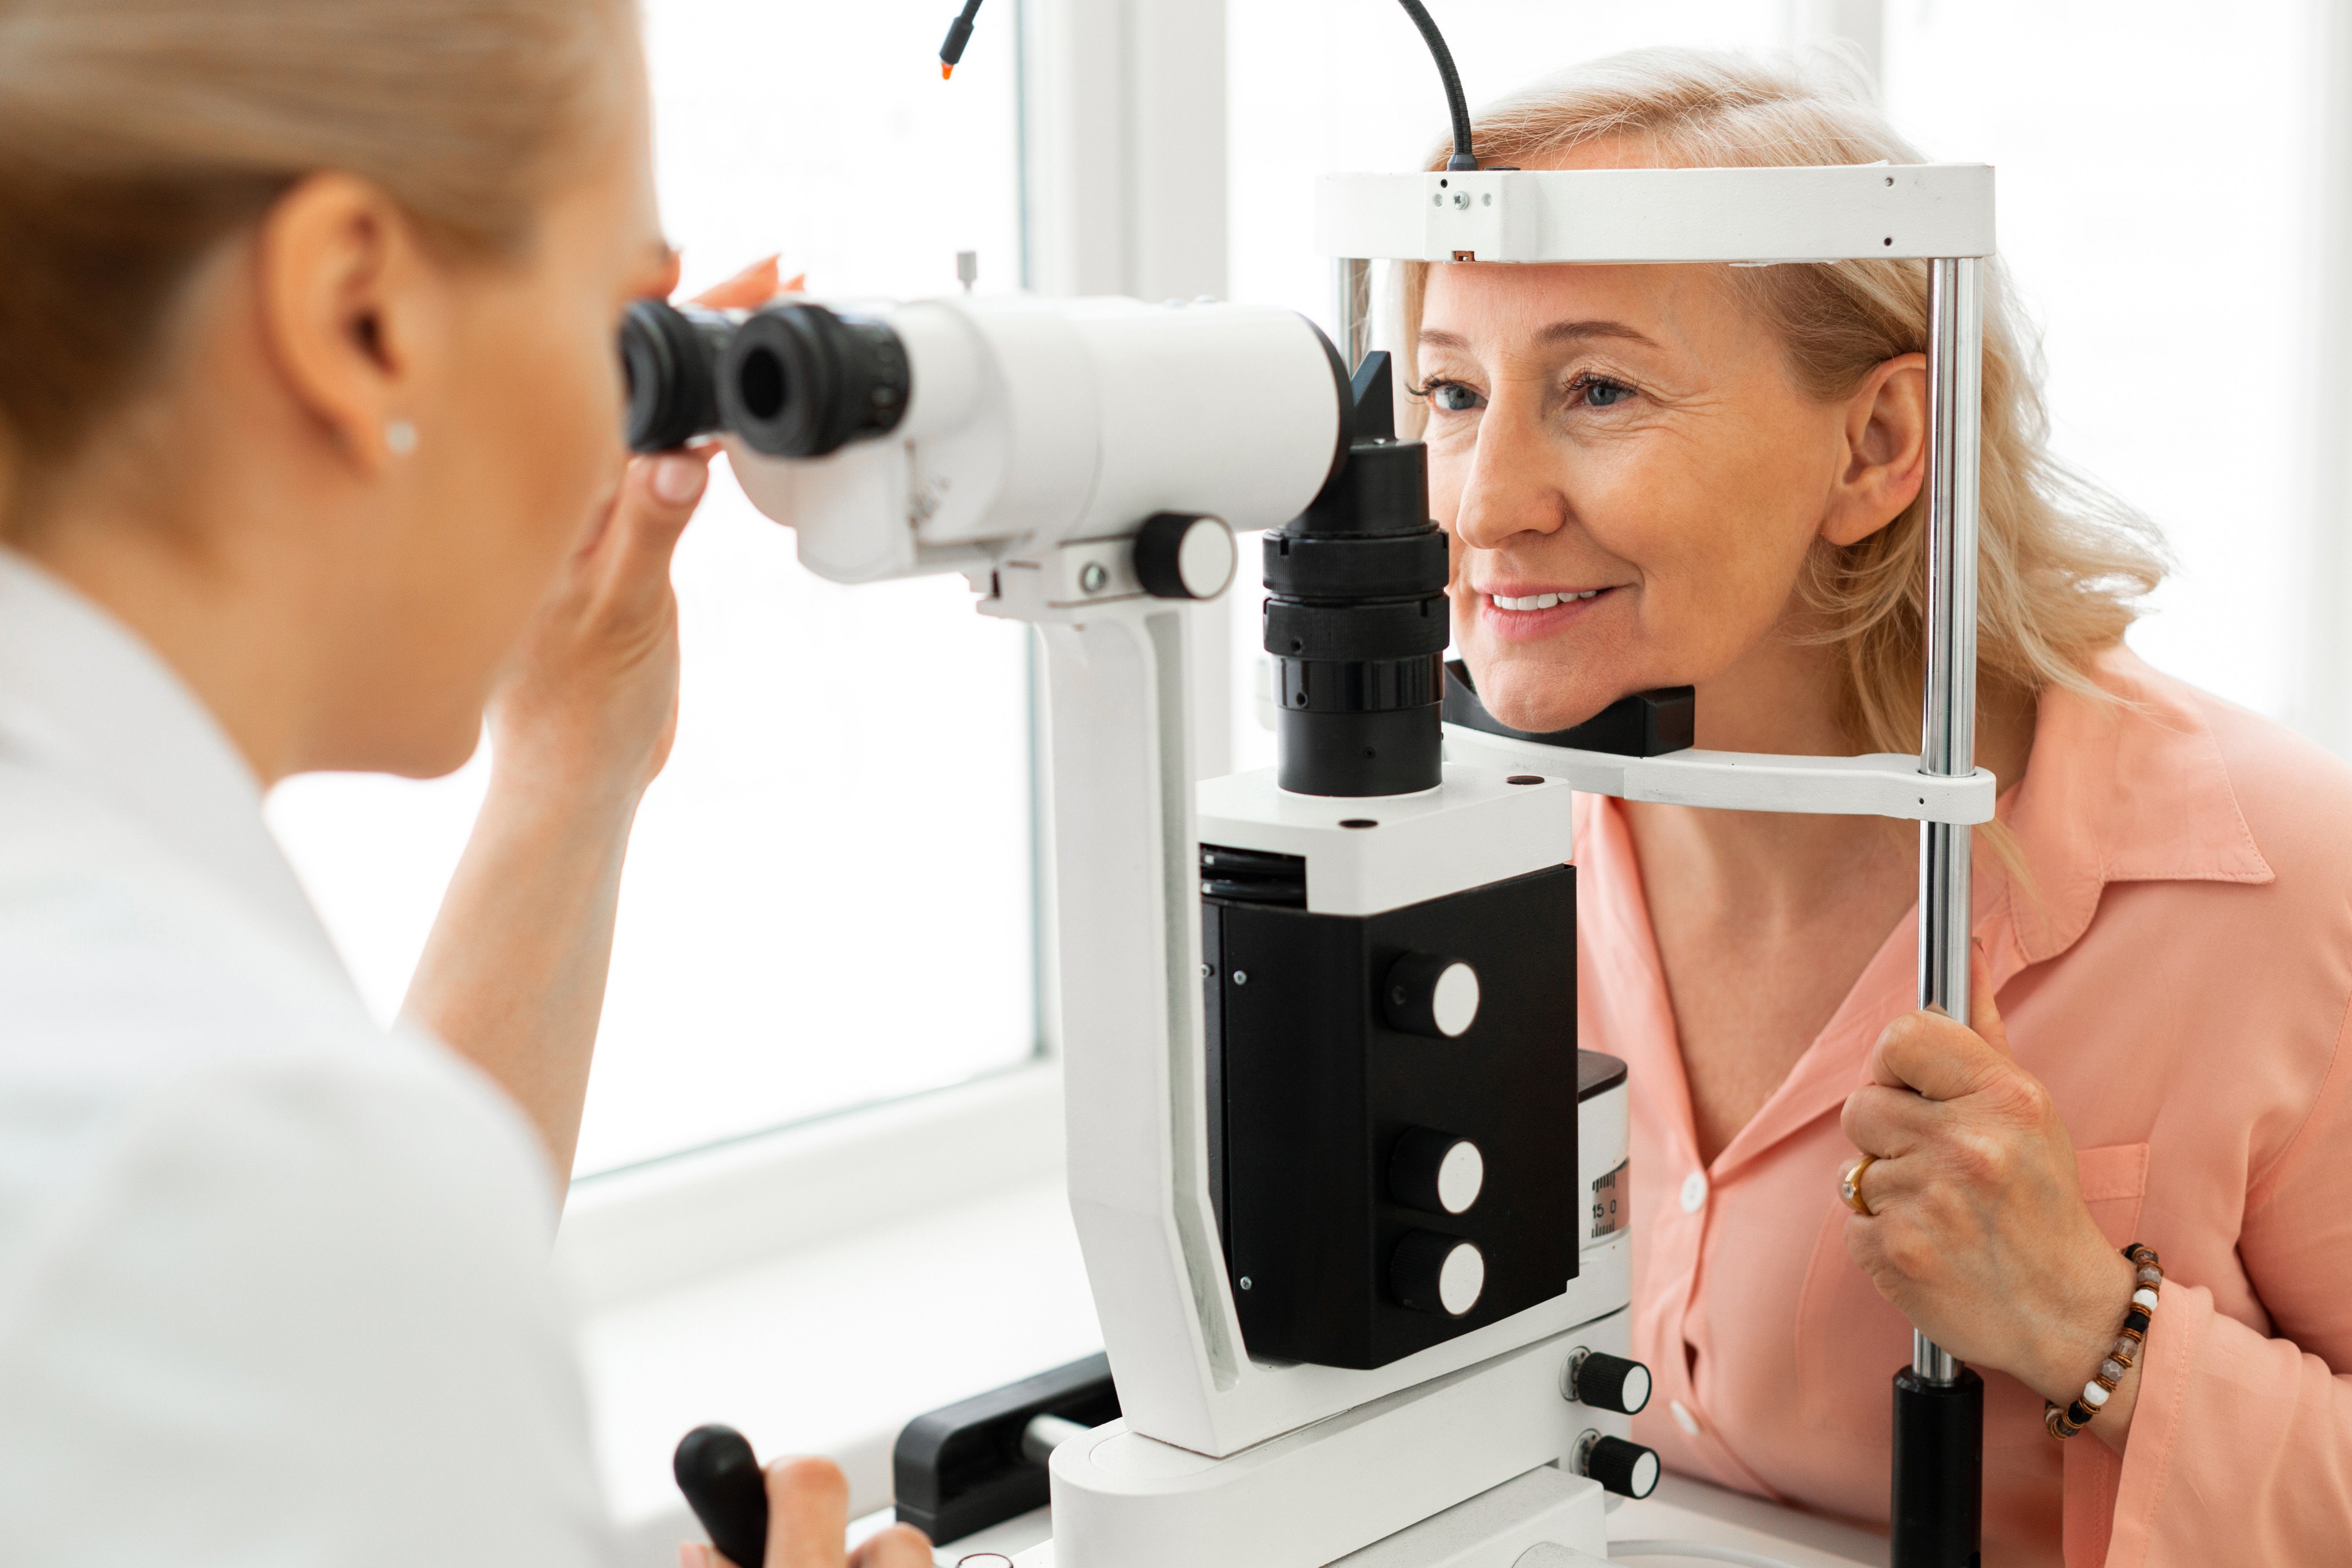 Your eyesight could affect your mental health, according to a recent study, which found a link between vision problems and a higher risk of dementia. Experts advise getting your vision checked regularly. Photo: Shutterstock